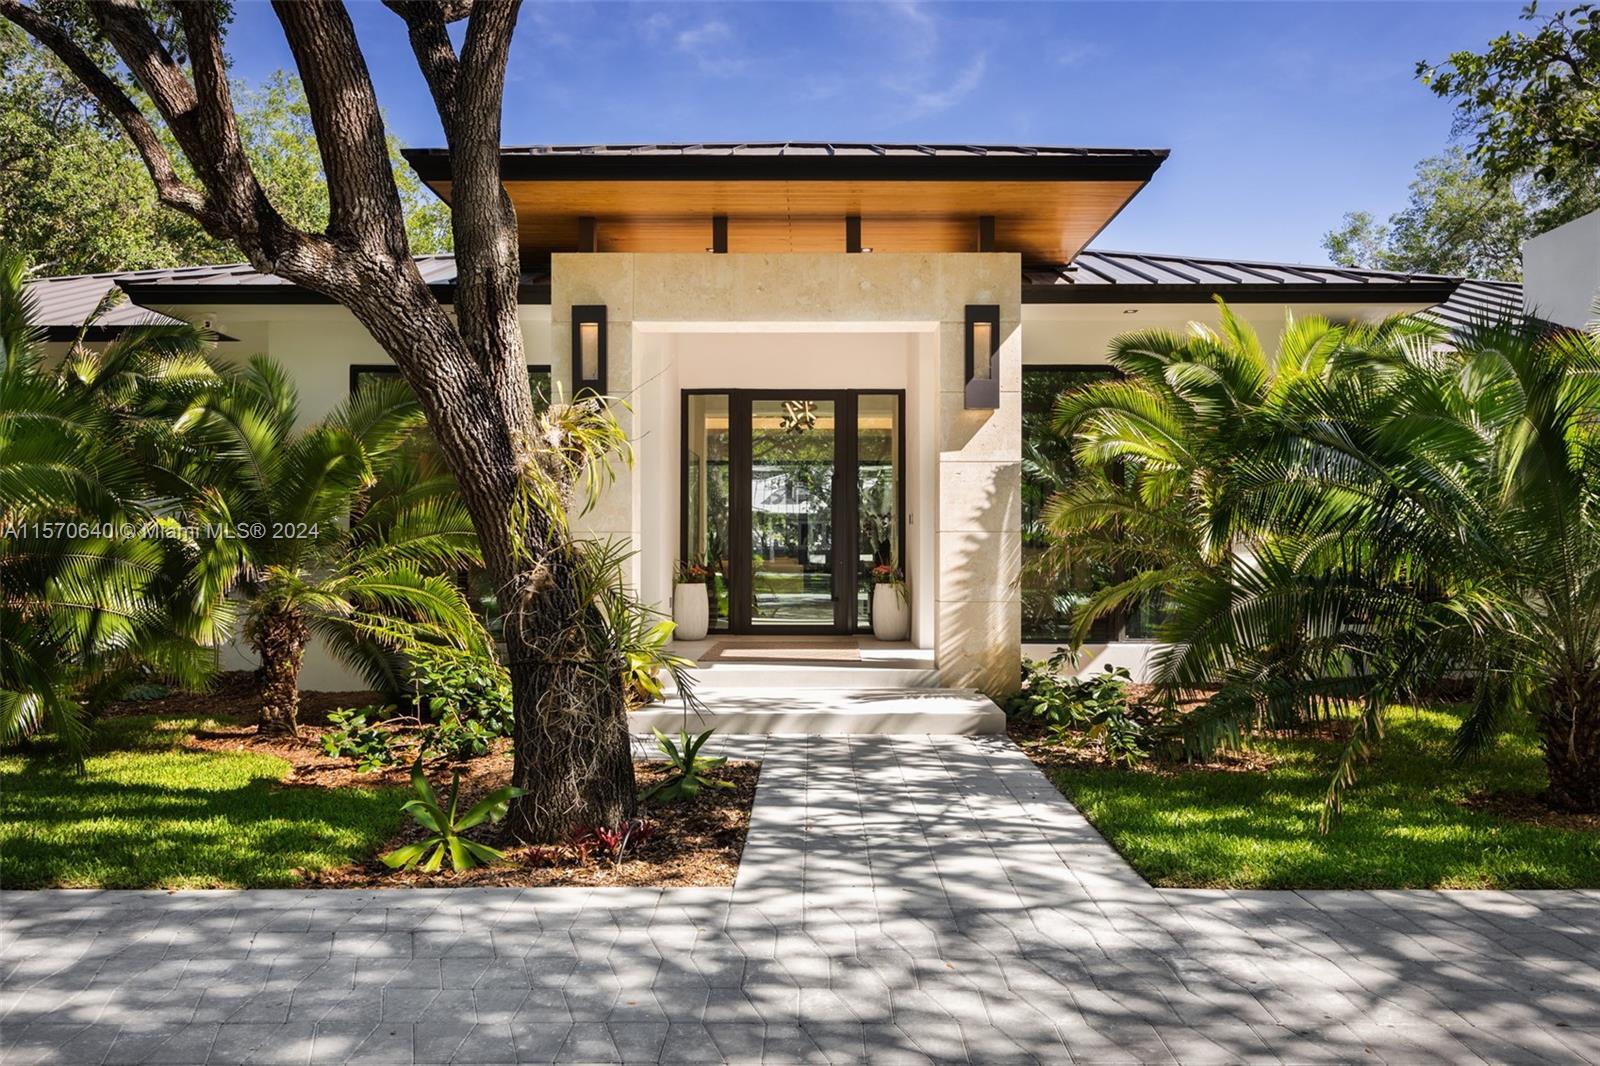 This custom-built, new construction home in Pinecrest exudes luxury, tranquility + style at every tu